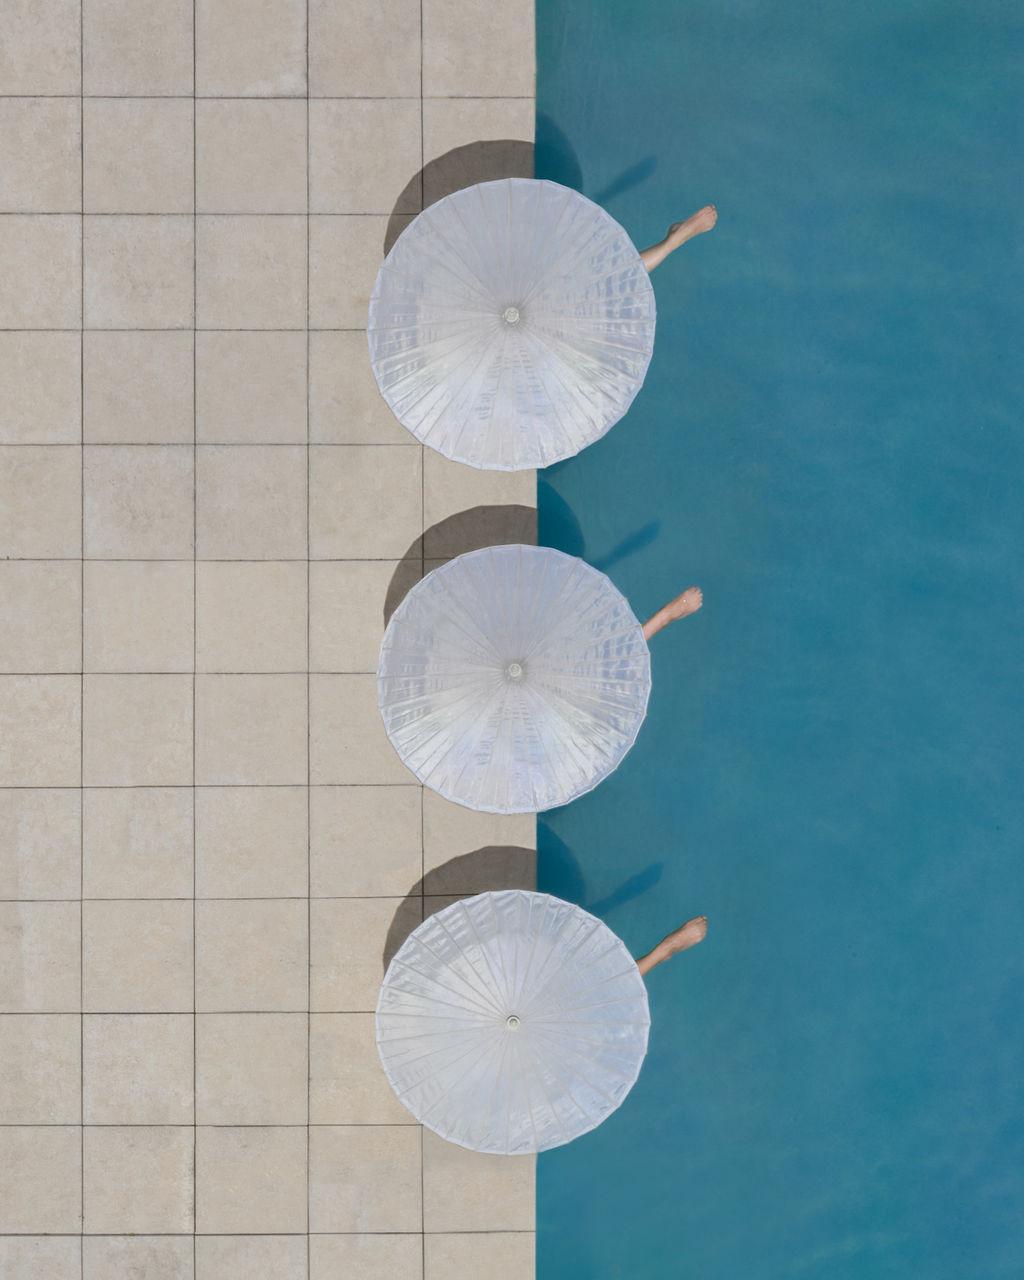 Feast Your Eyes on these Mesmerizing Synchronised Swimming Shots by Brad Walls